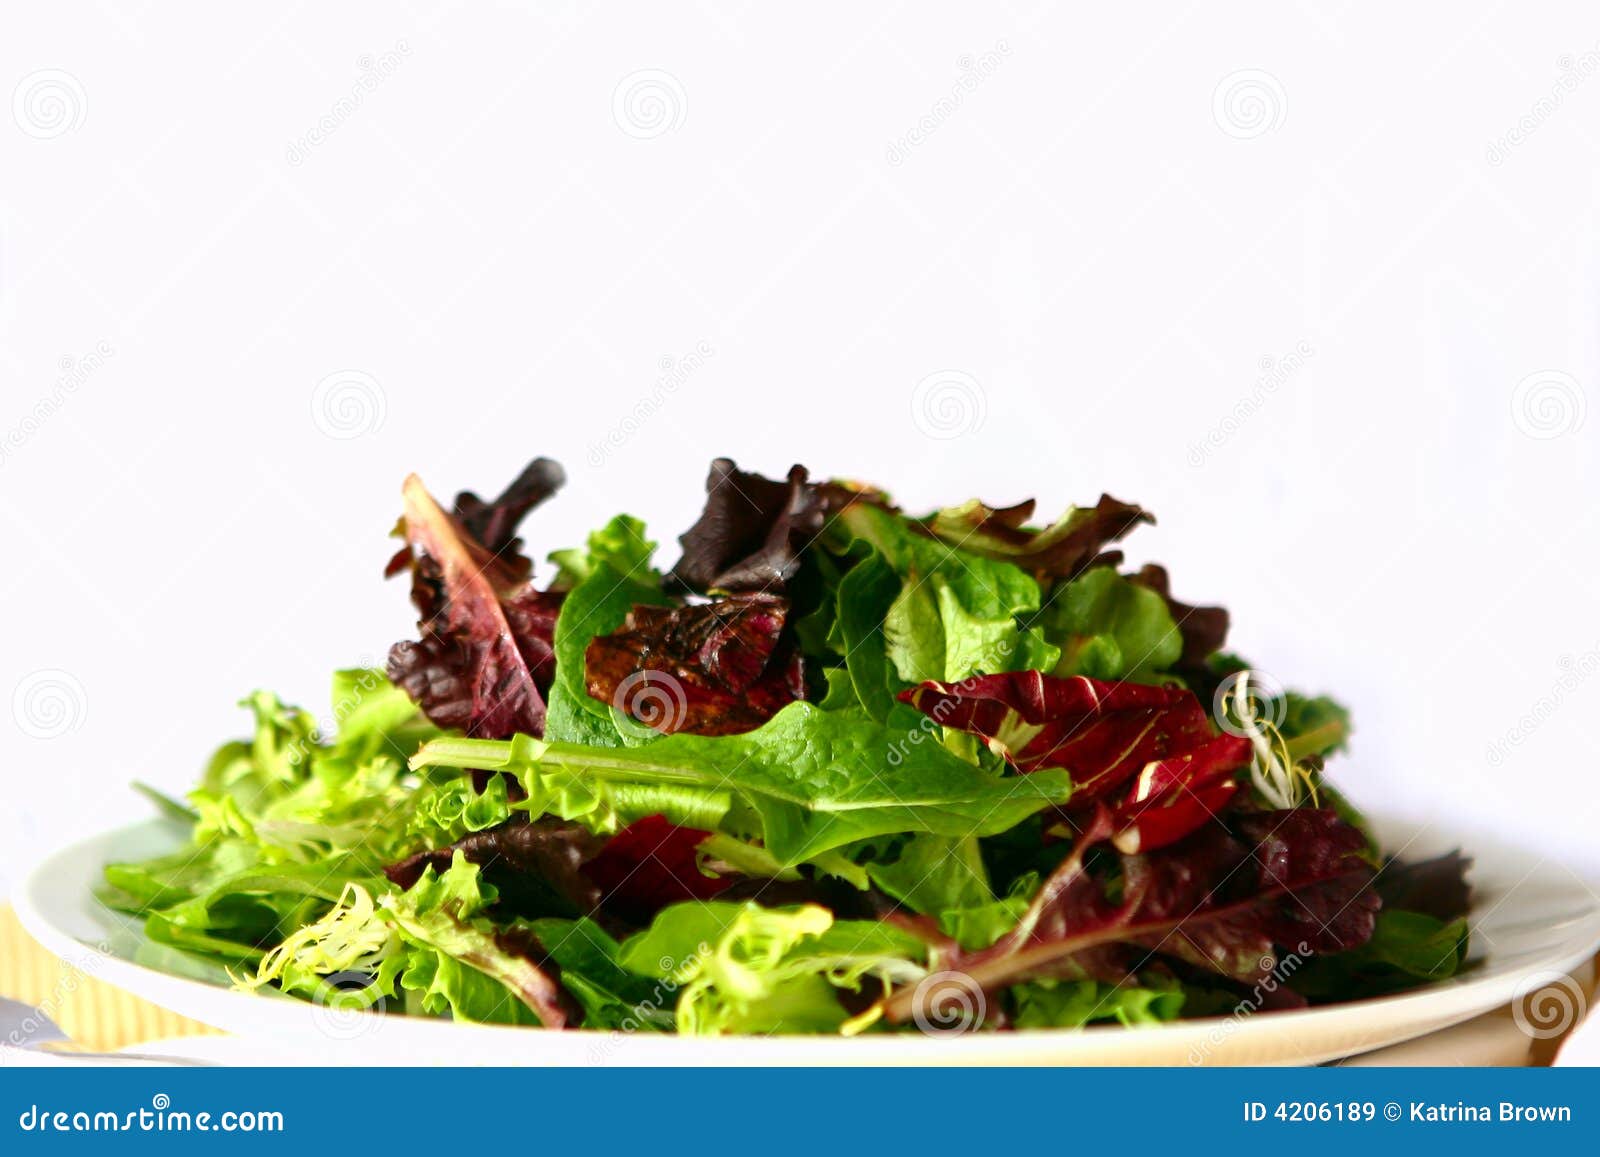 plain mixed salad on a plate